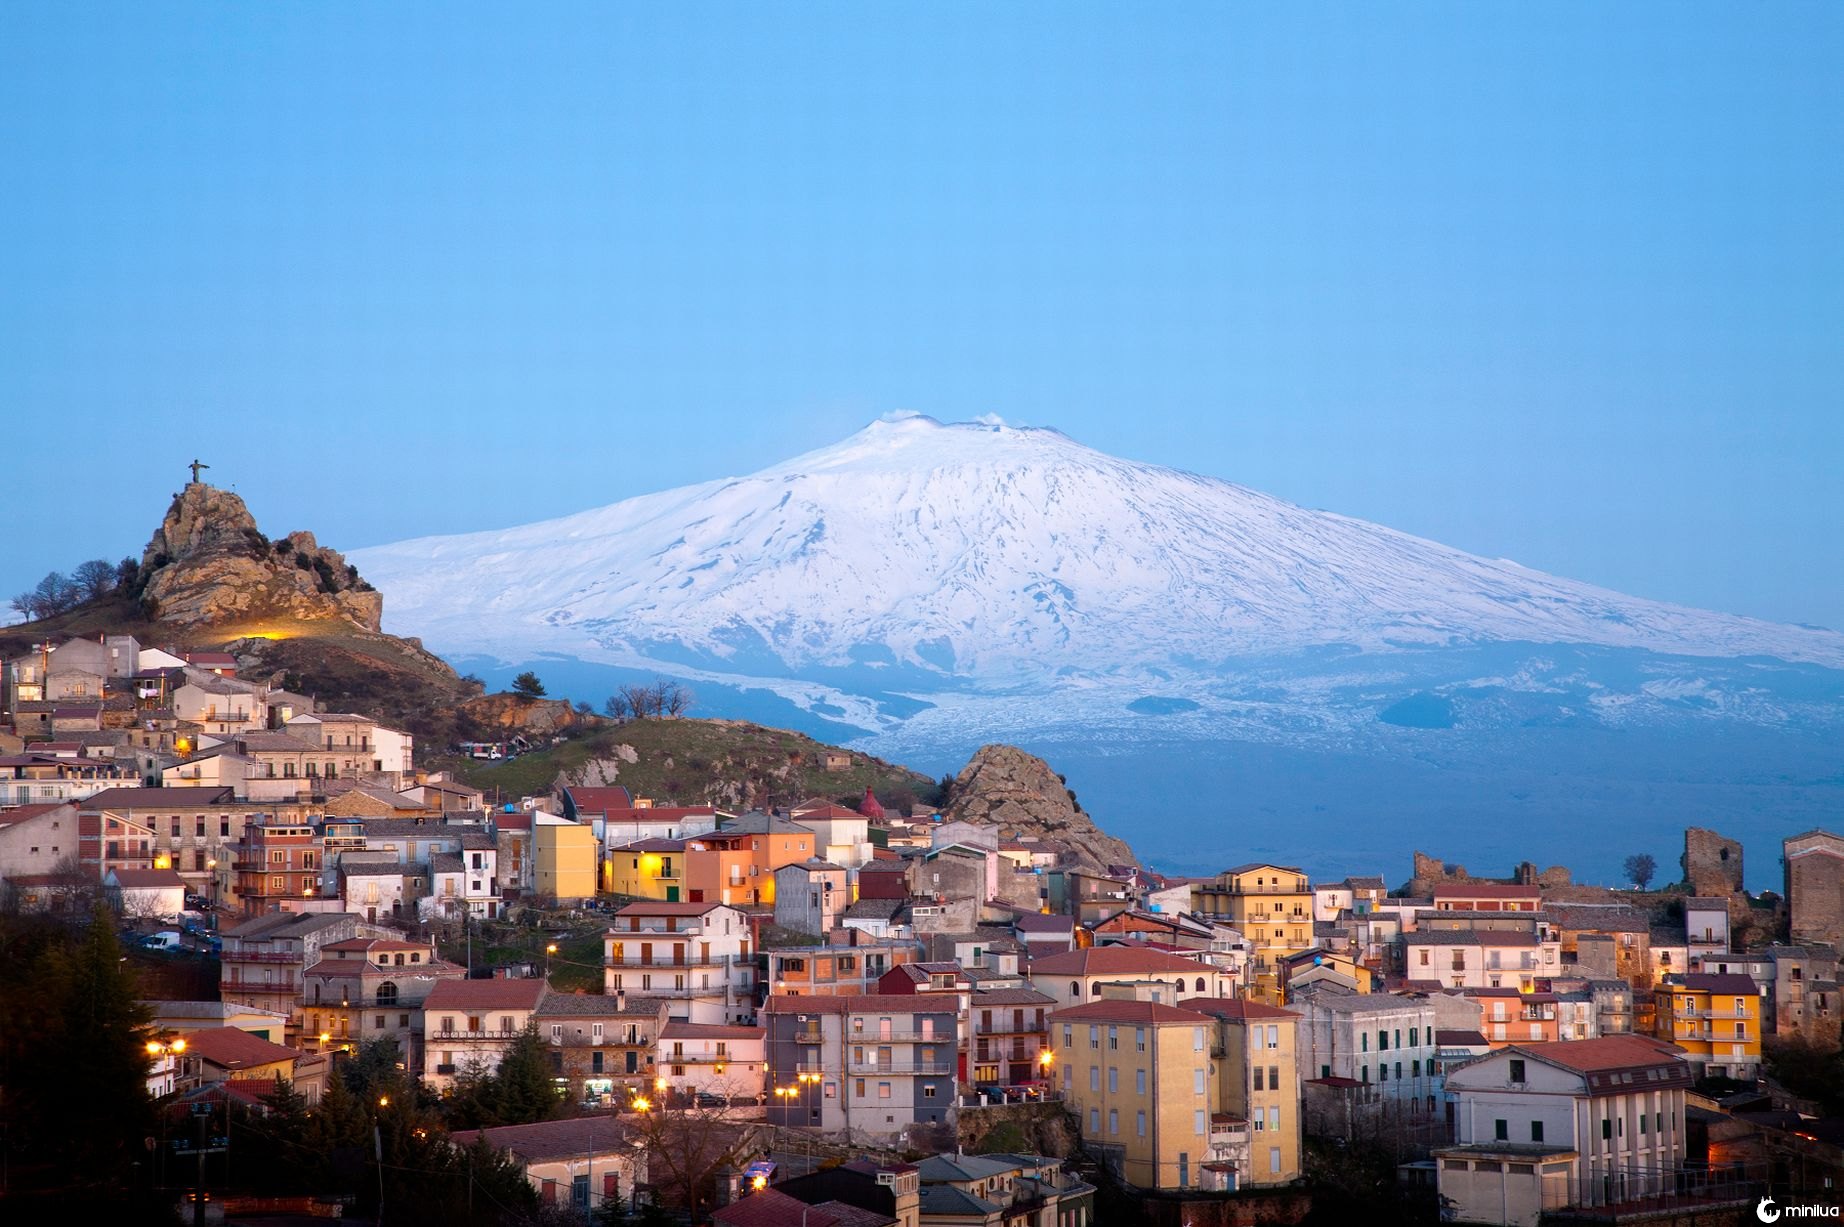 View of the village of San Teodoro and Etna volcano on background